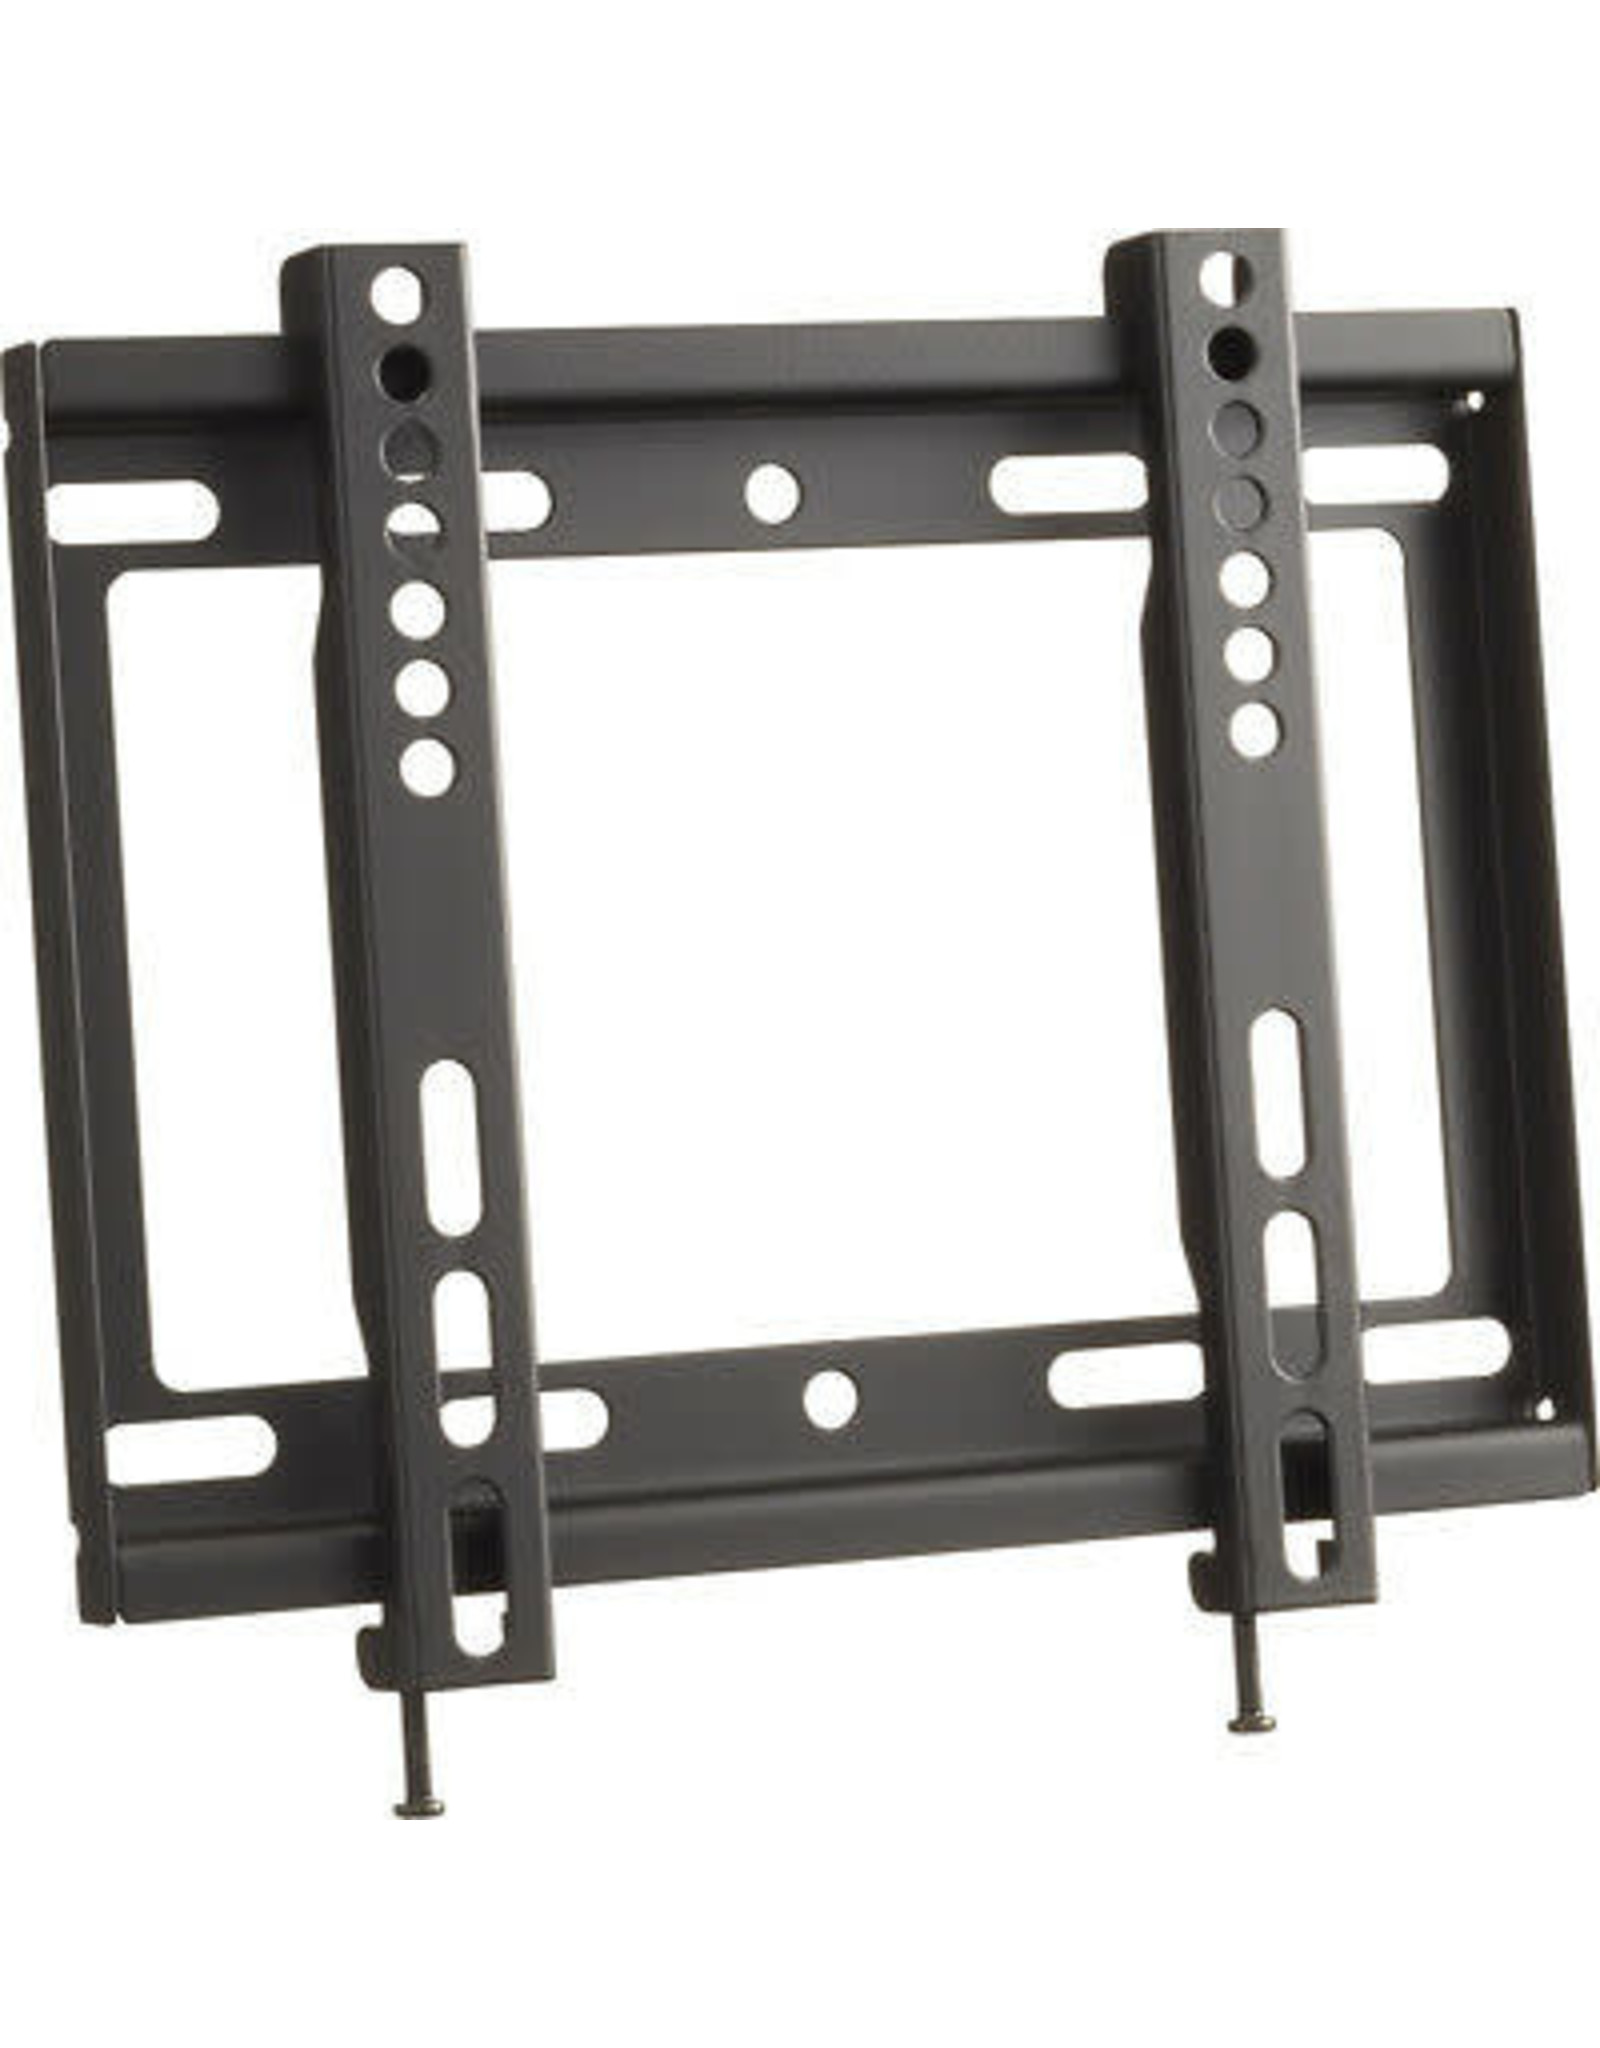 Insignia™ Insignia™ Insignia™ - Fixed TV Wall Mount for Most 19" - 39" TVs